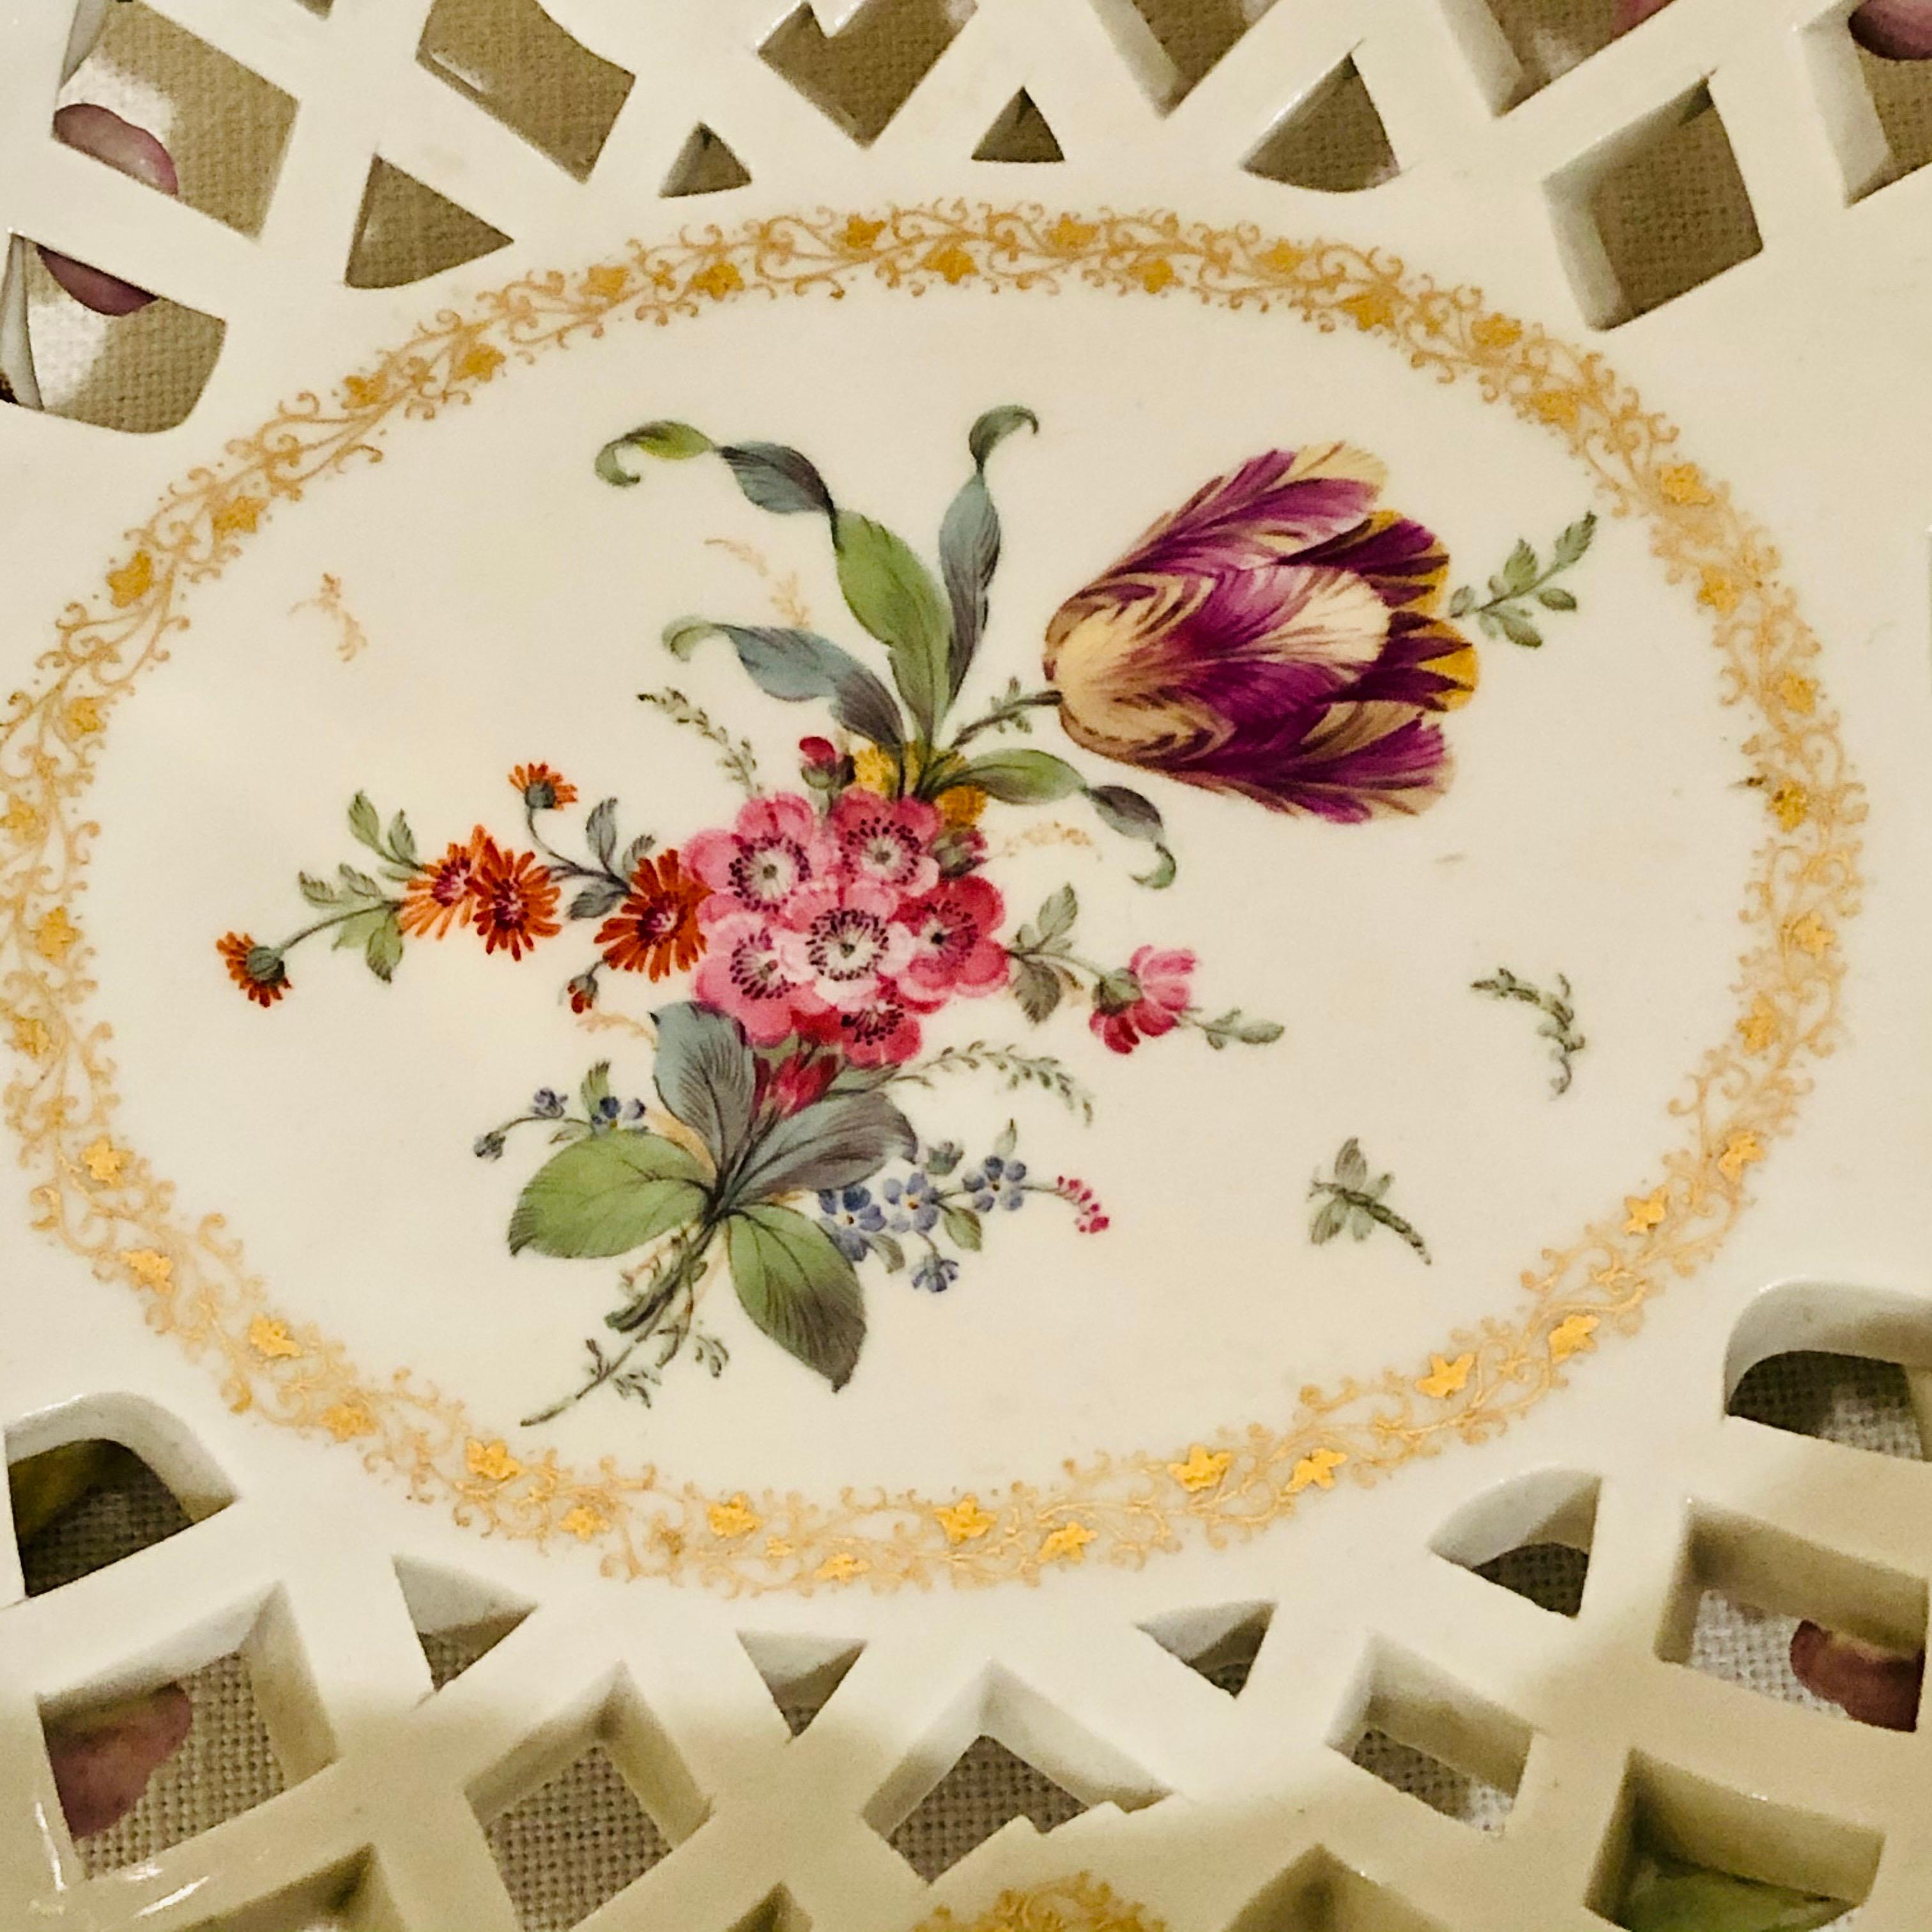 Porcelain KPM Reticulated Bowl with Raised Pink Flowers and Painted Birds For Sale